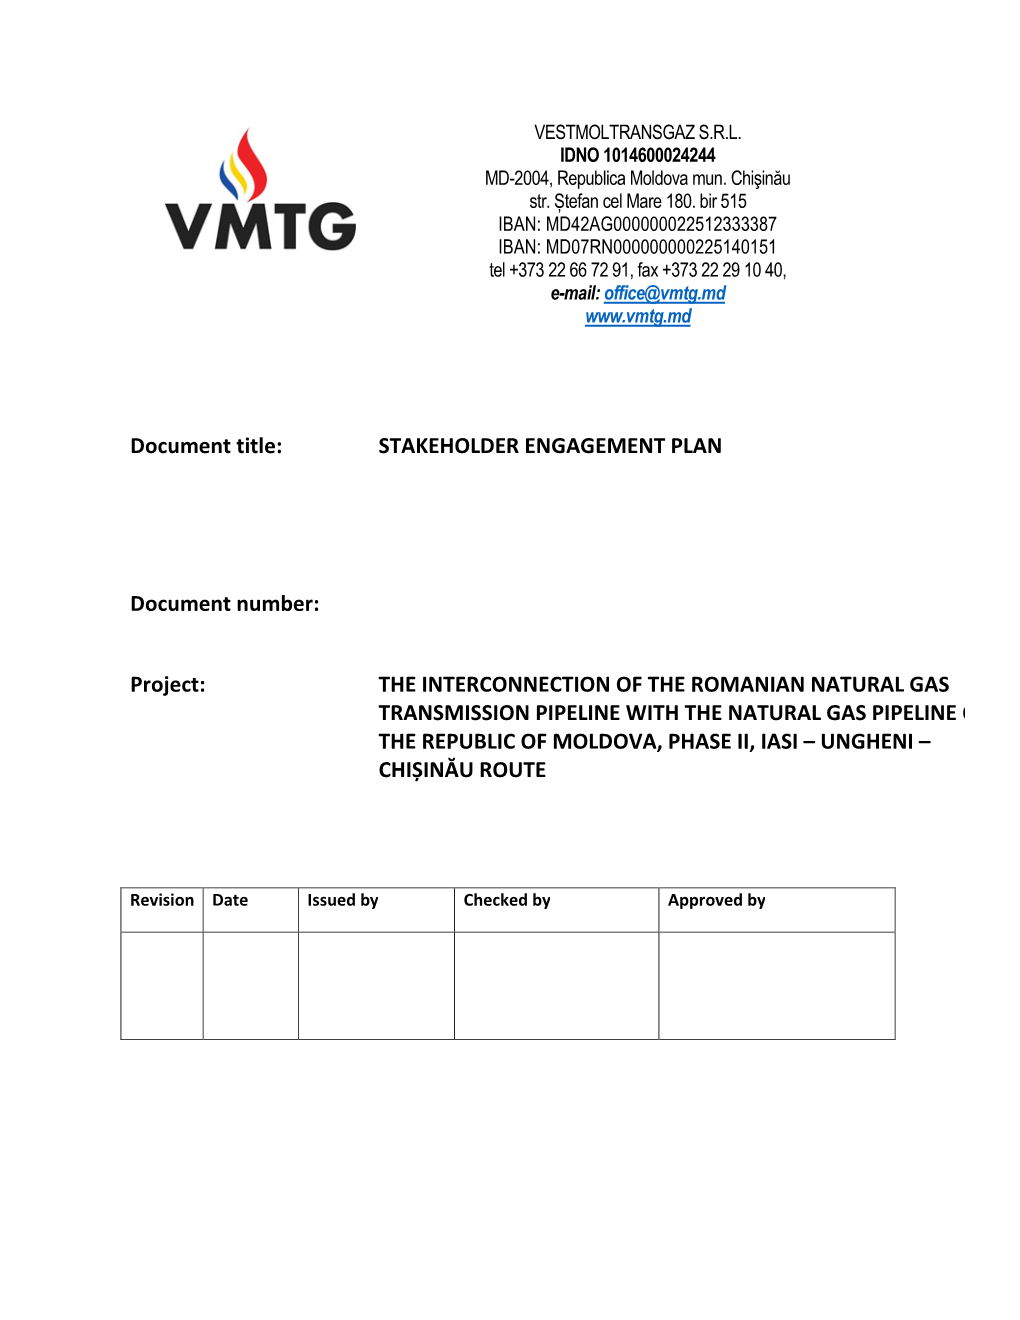 STAKEHOLDER ENGAGEMENT PLAN Document Number